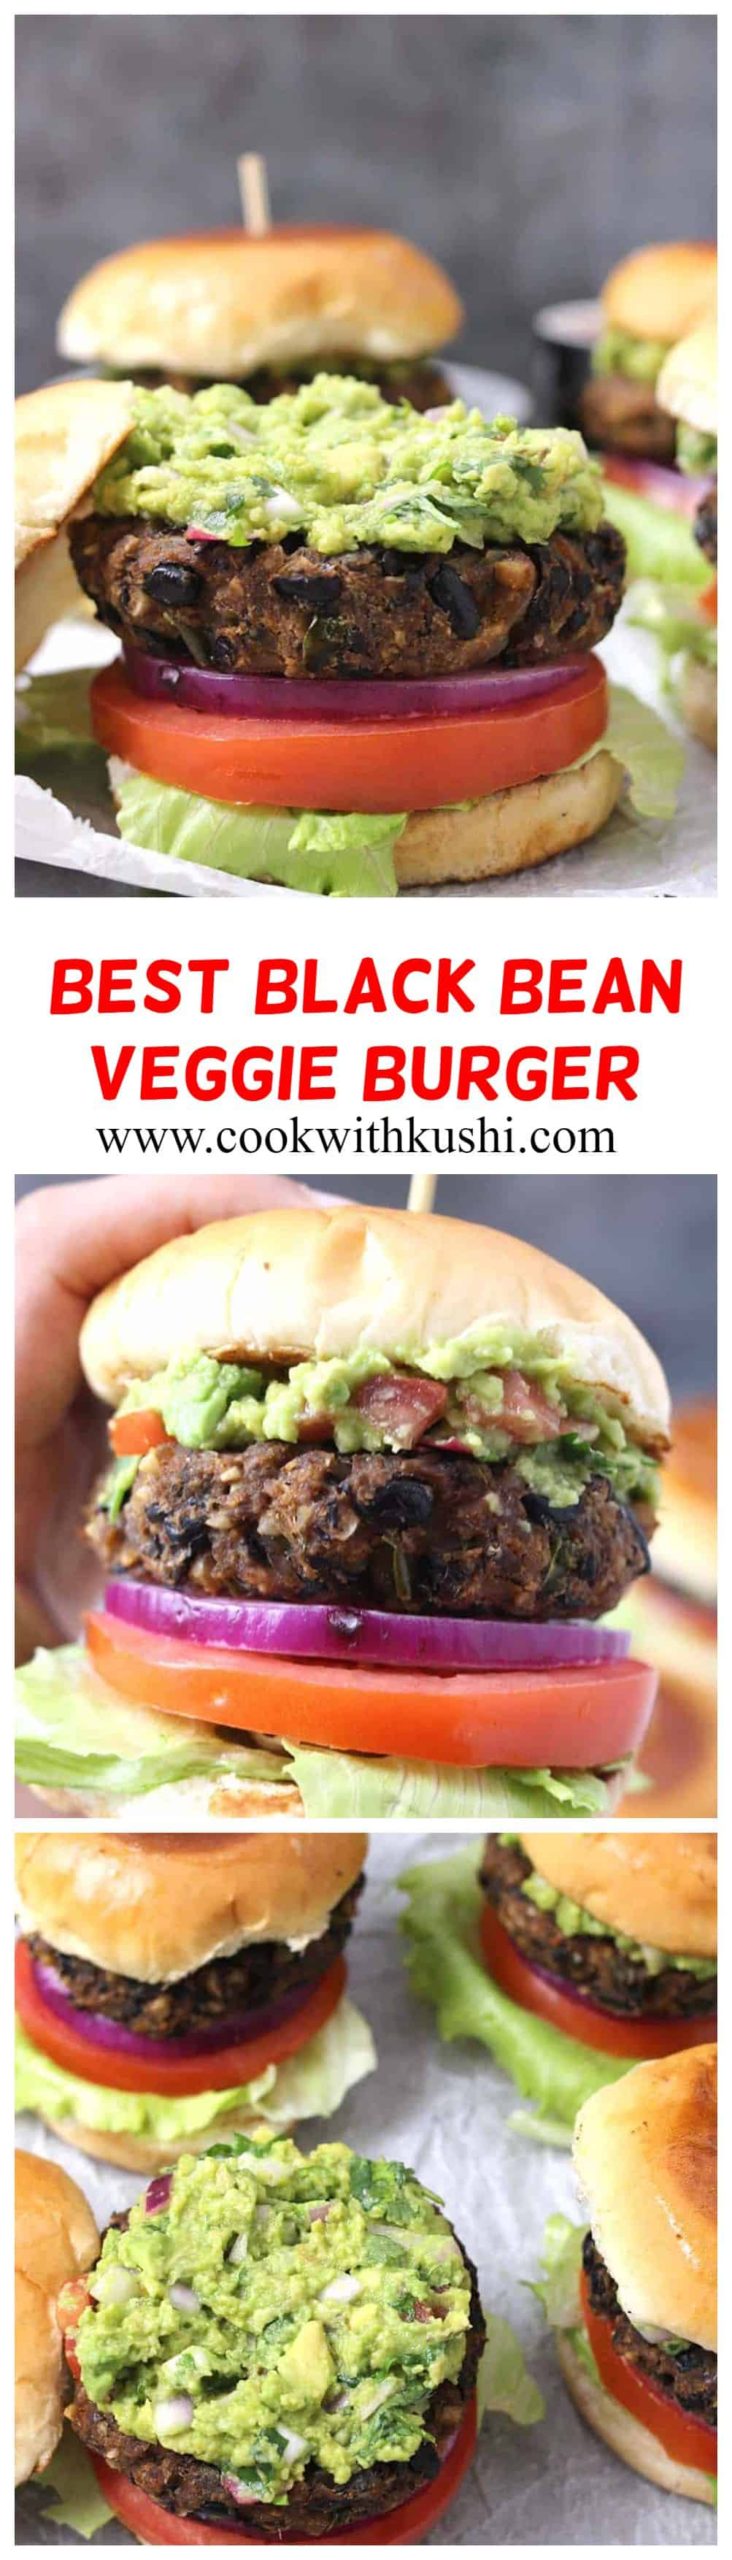 This Black Bean Burger is thick, healthy and hearty, quick and easy to make fool proof vegetarian recipe. Even meat eaters are going to love this low calorie food for dinner! #blackbeanburger #veggieburgerrecipe #burgerpattyrecipe #bbqrecipes #veggeiesgrill